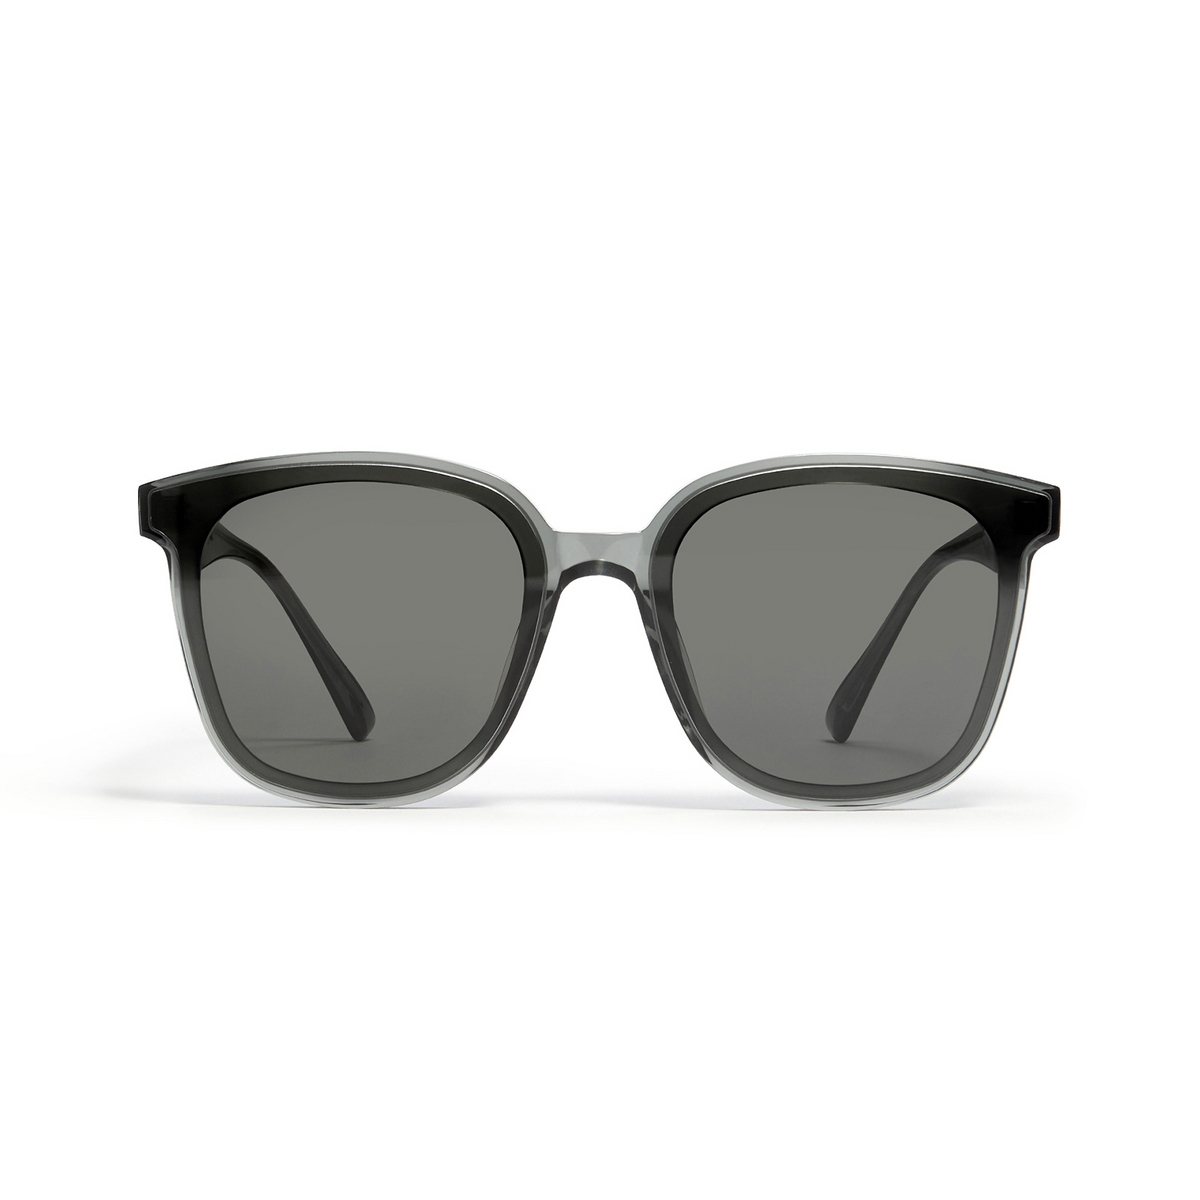 Gentle Monster JACKIE Sunglasses G3 Grey - front view